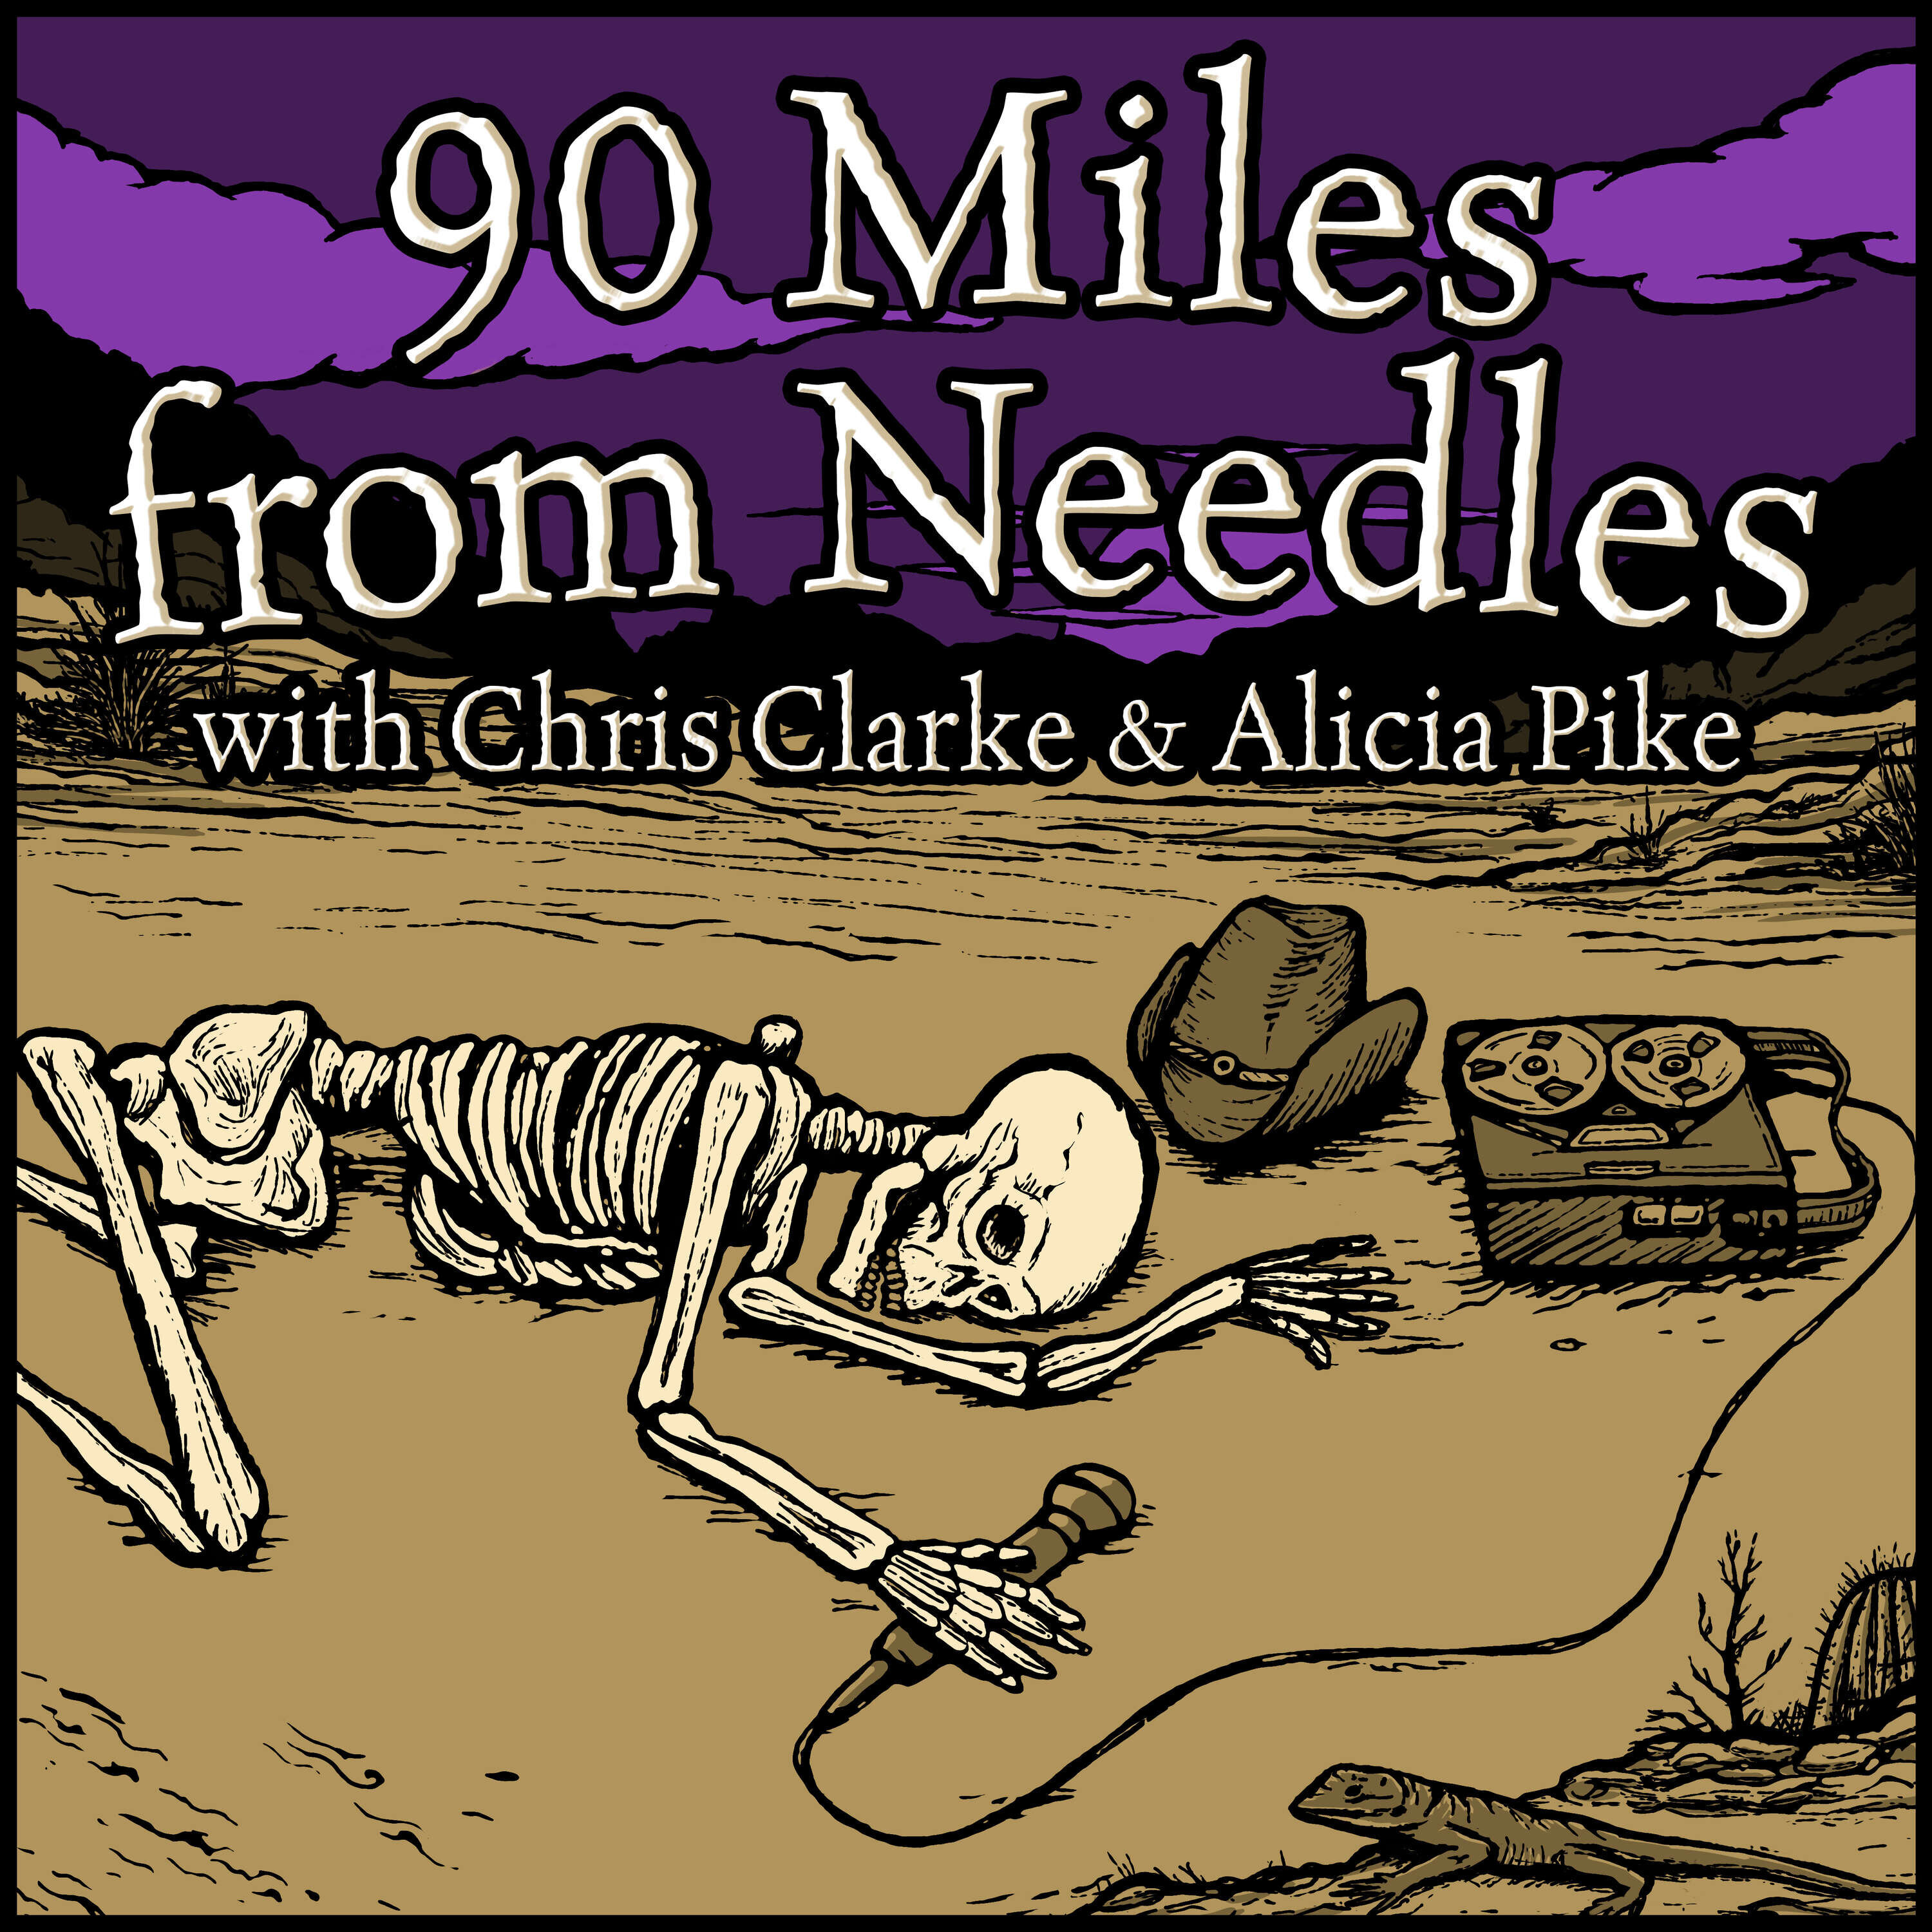 90 Miles from Needles: the Desert Protection Podcast